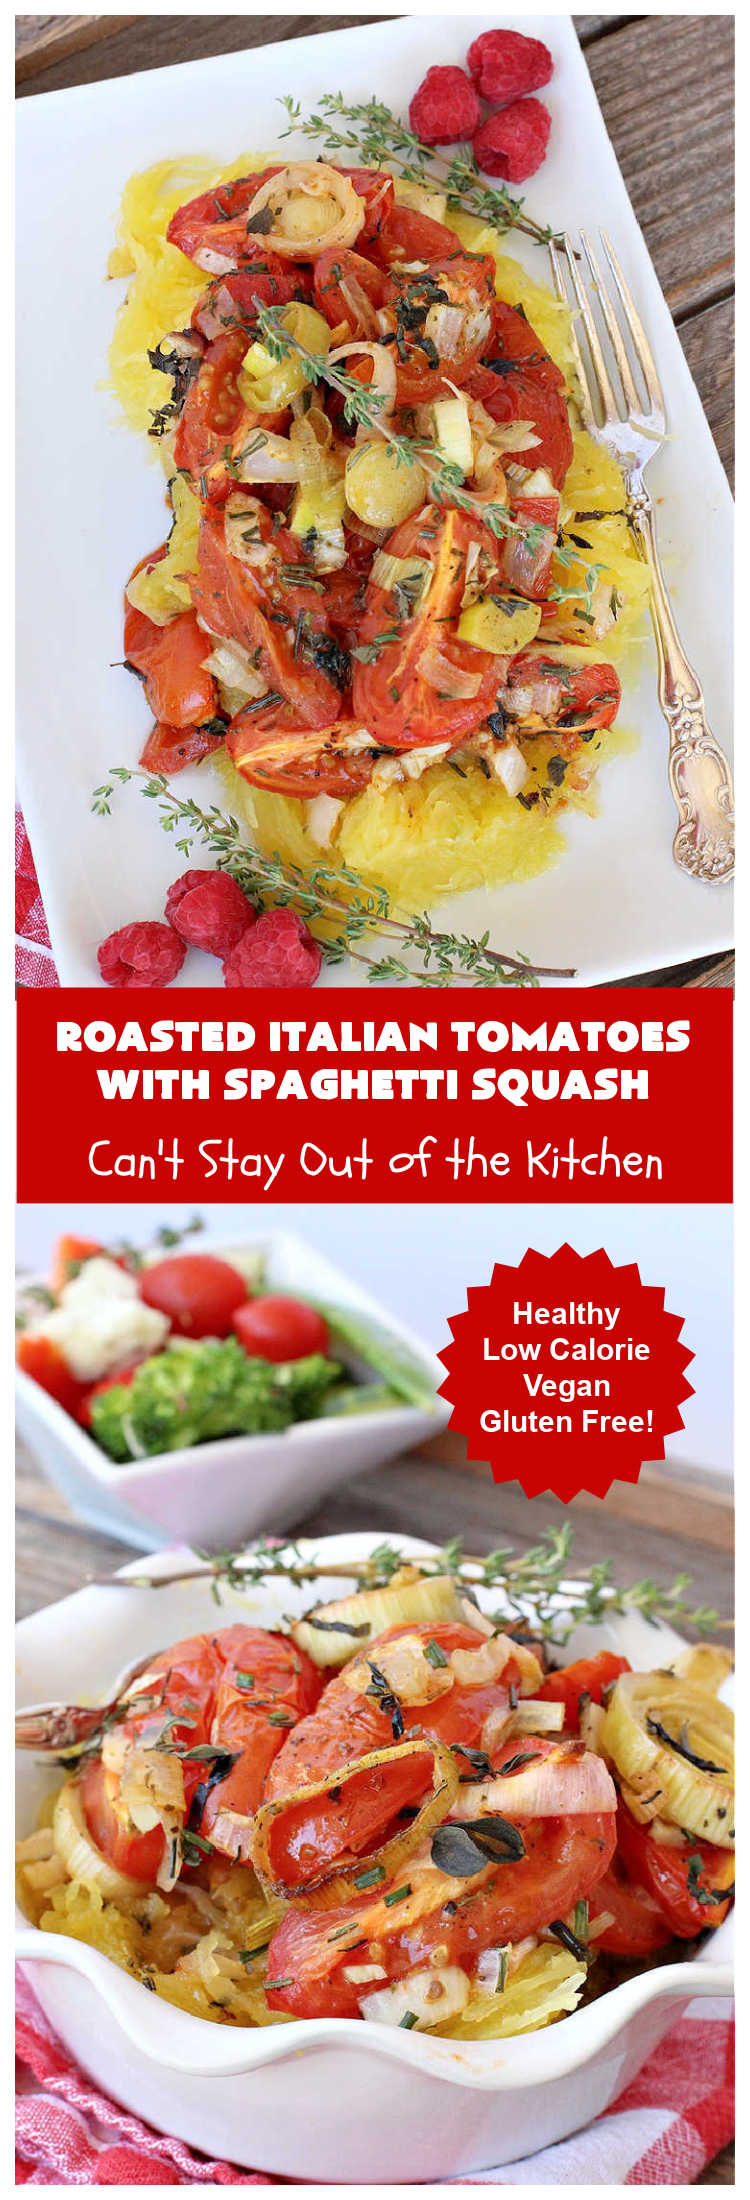 Roasted Italian Tomatoes with Spaghetti Squash | Can't Stay Out of the Kitchen | this mouthwatering entree is made with #RoastedTomatoes with lots of herbs to spice it up. It's terrific for a #MeatlessMonday entree & is #healthy, #LowCalorie, #Vegan & #GlutenFree. #Italian #SpaghettiSquash #RoastedItalianTomatoesWithSpaghettiSquash